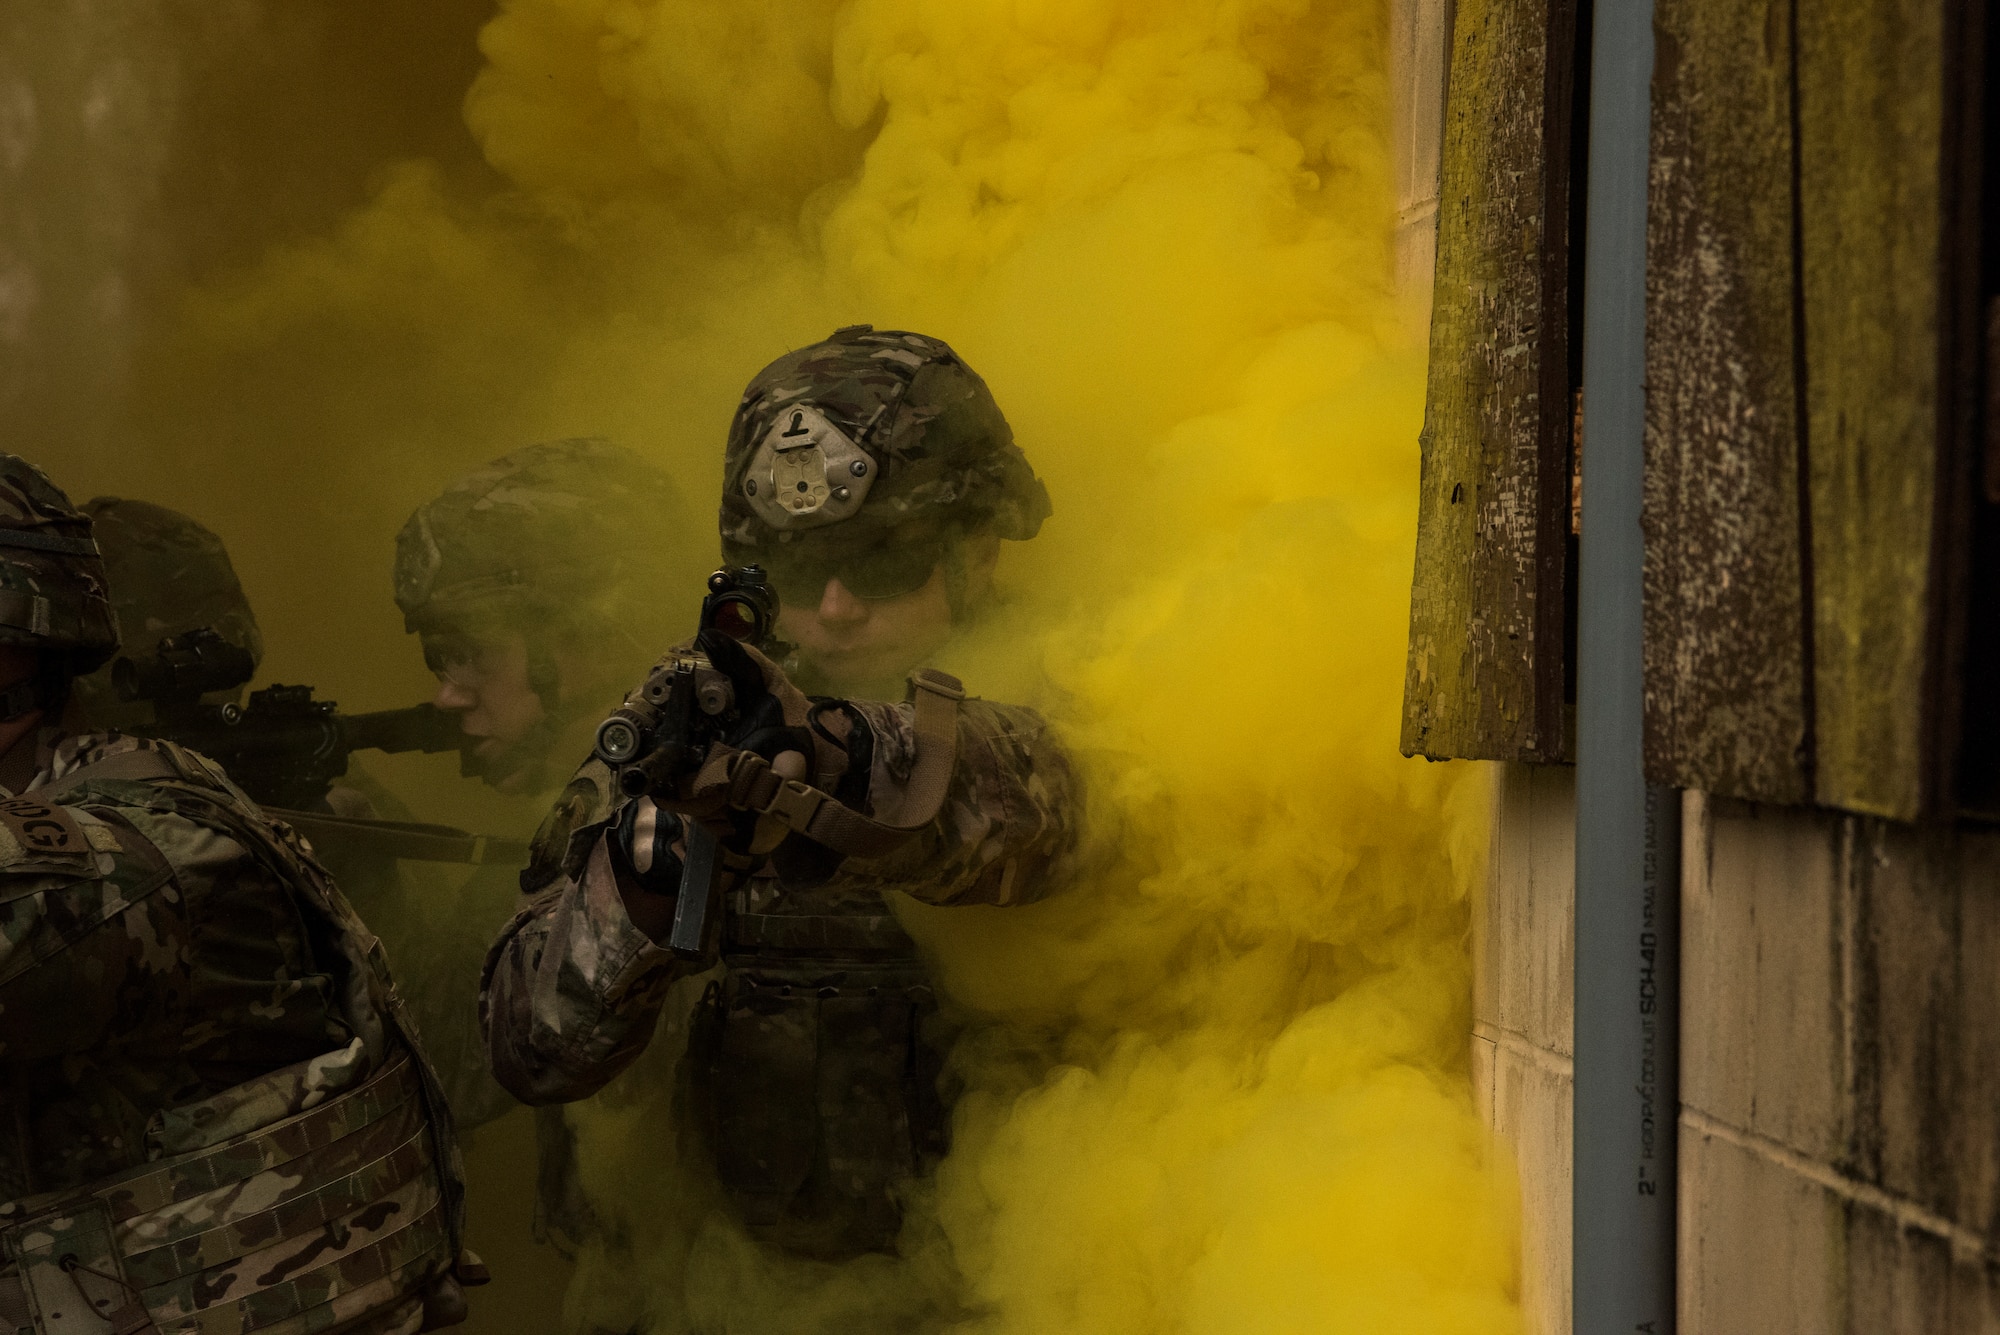 Airman 1st Class Kevin Cenci, 823rd Base Defense Squadron fire team member, moves through smoke as concealment from simulated enemy forces, Moody Air Force Base, Jan. 12, 2018. The 823rd is one of three operational security forces squadrons under the 820th Base Defense Group whose mission is to provide high-risk force protection and integrated base defense for expeditionary forces. (U.S. Air Force photo by Bennie J. Davis III)